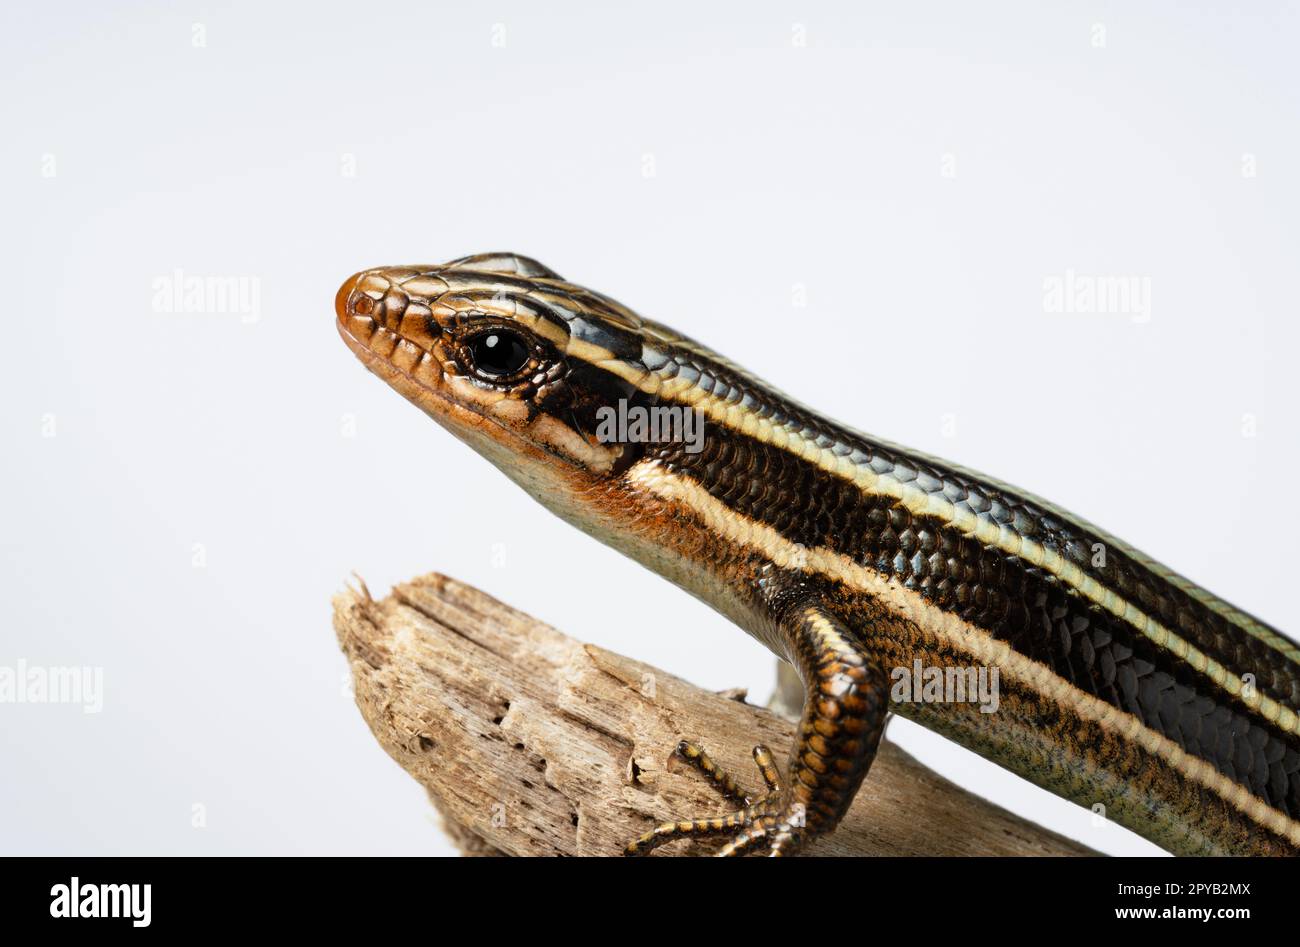 A juvenile Japanese five-lined skink holding onto a tree branch. Stock Photo